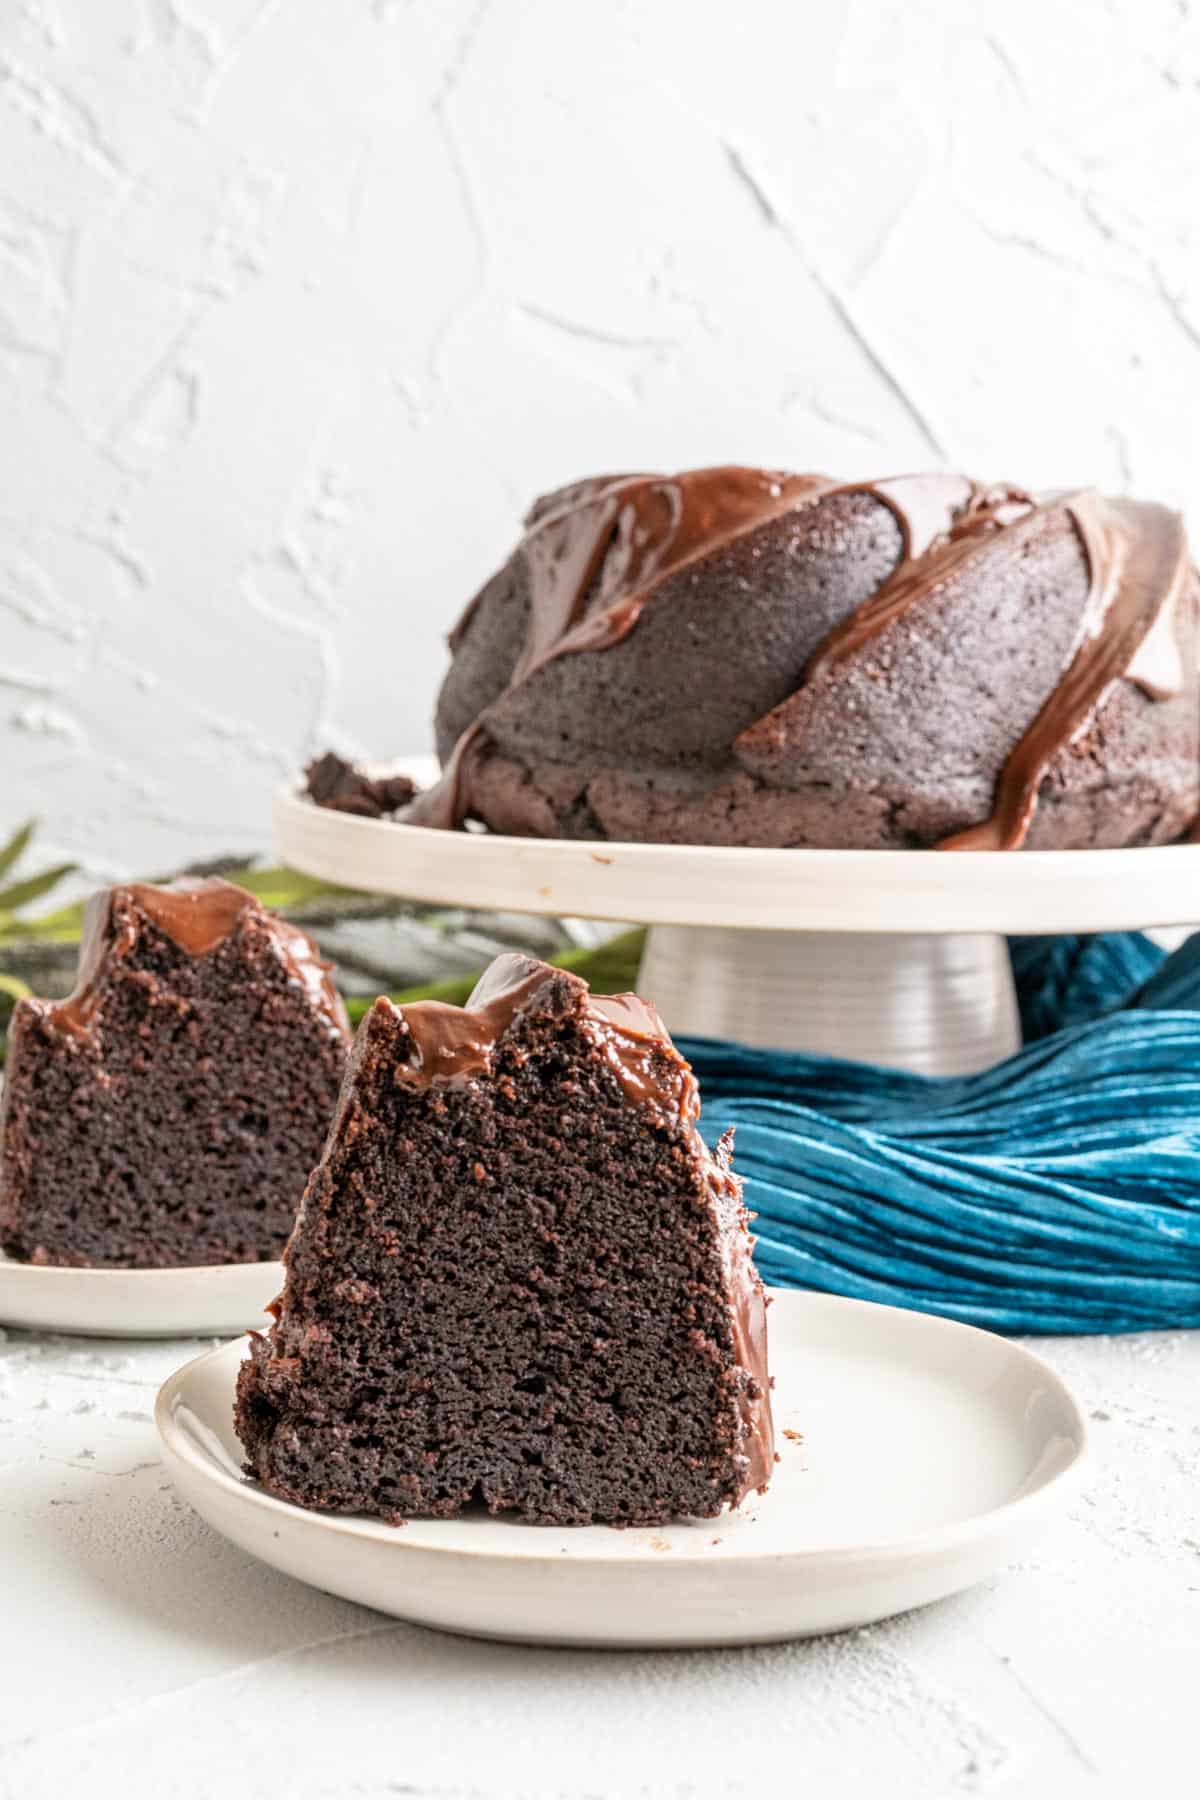 two pieces of dark chocolate bundt cake on white plates with the cake in the backdrop.